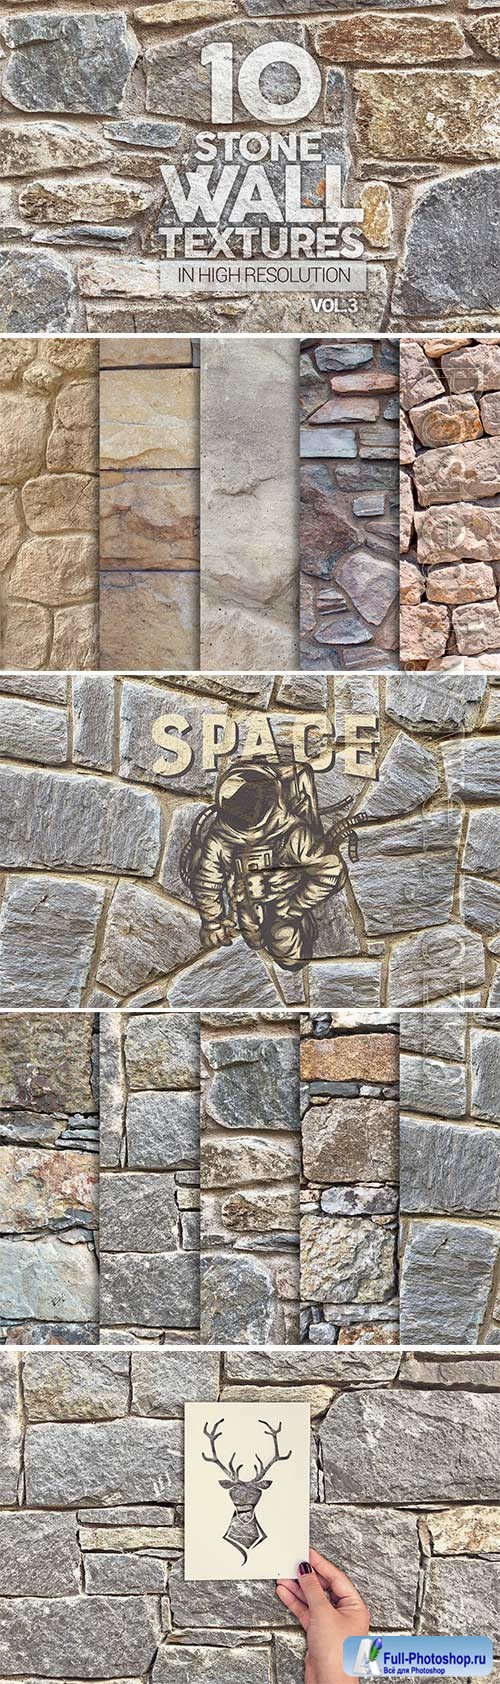 Stone Wall Textures x10 Vol.3